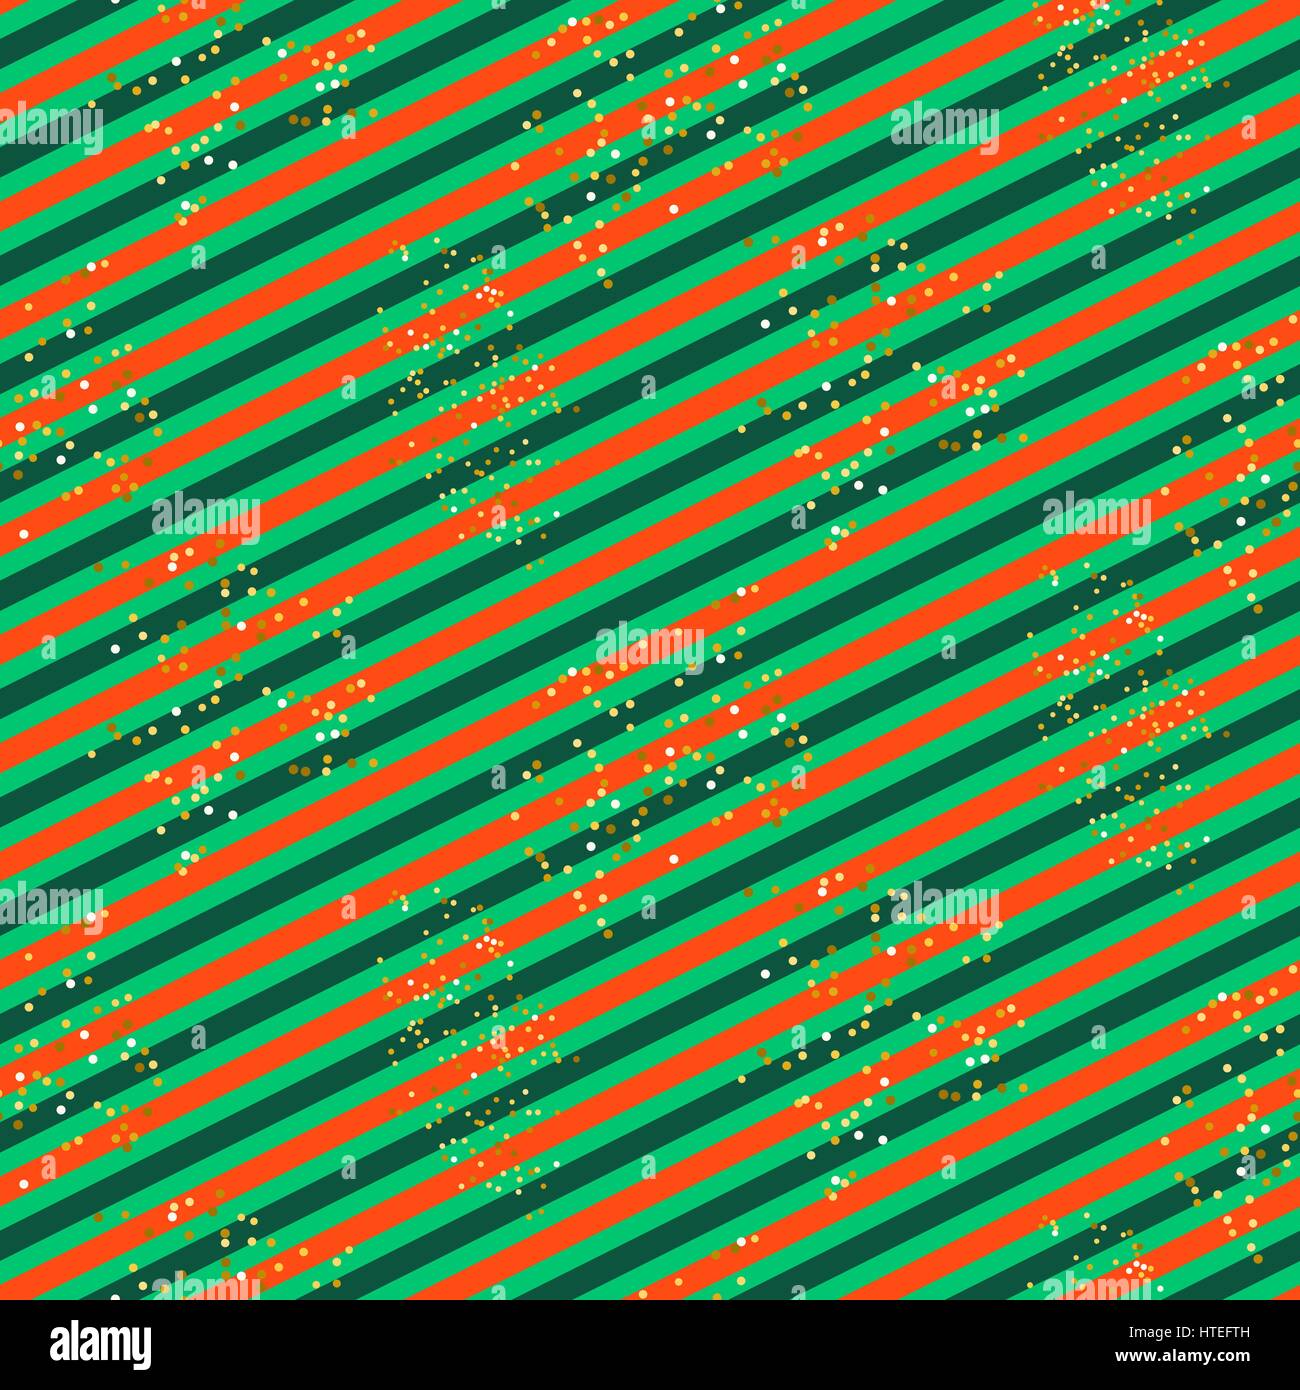 Diagonal red and green line seamless pattern with glitter. Striped background for festive wrap paper. Stock Vector